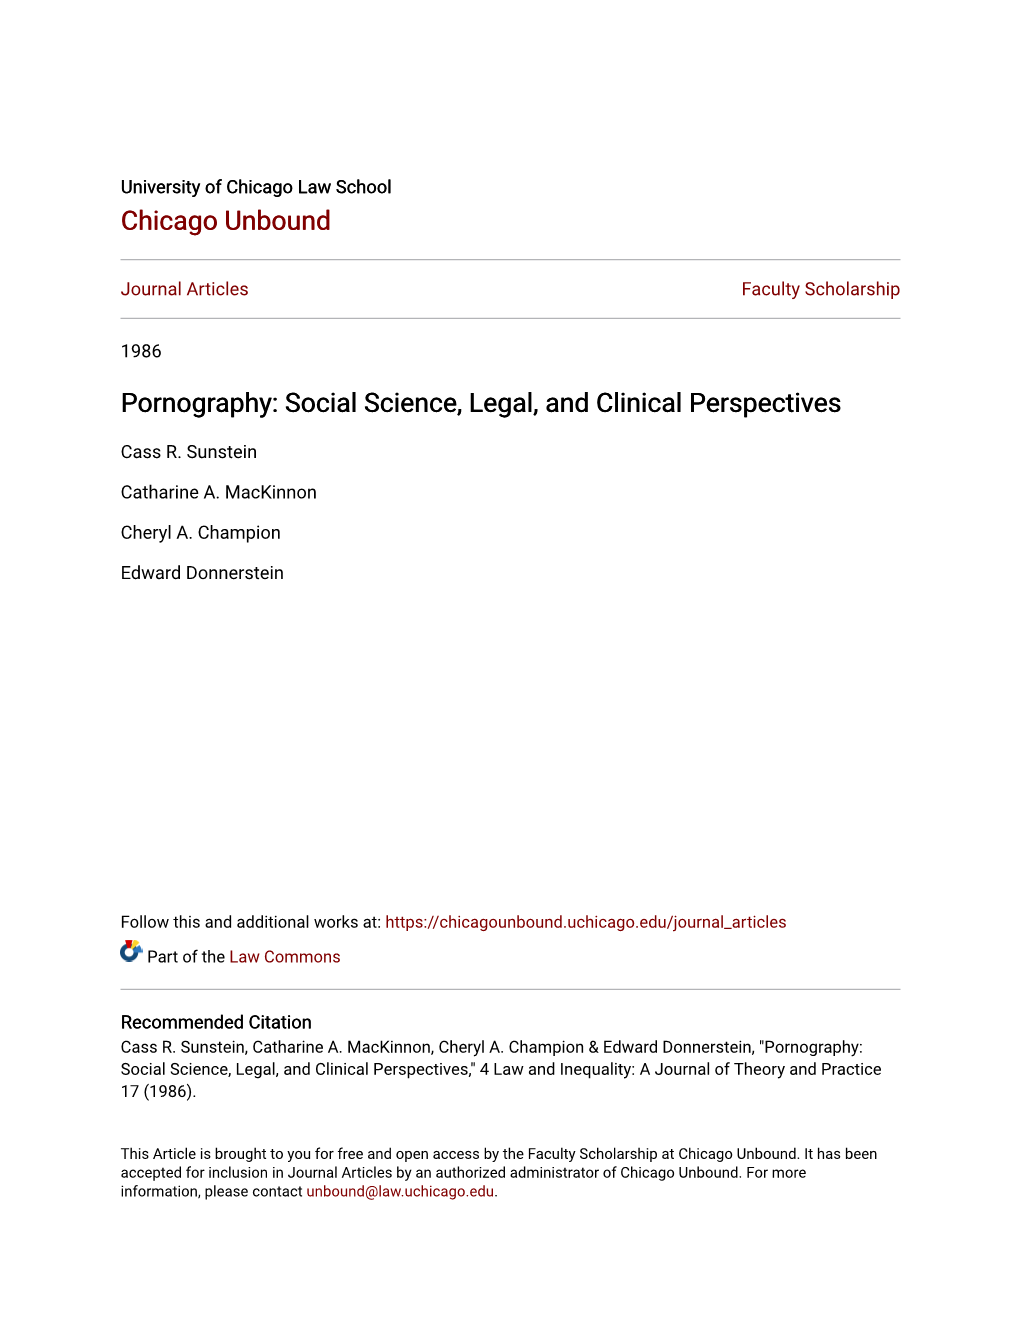 Pornography: Social Science, Legal, and Clinical Perspectives